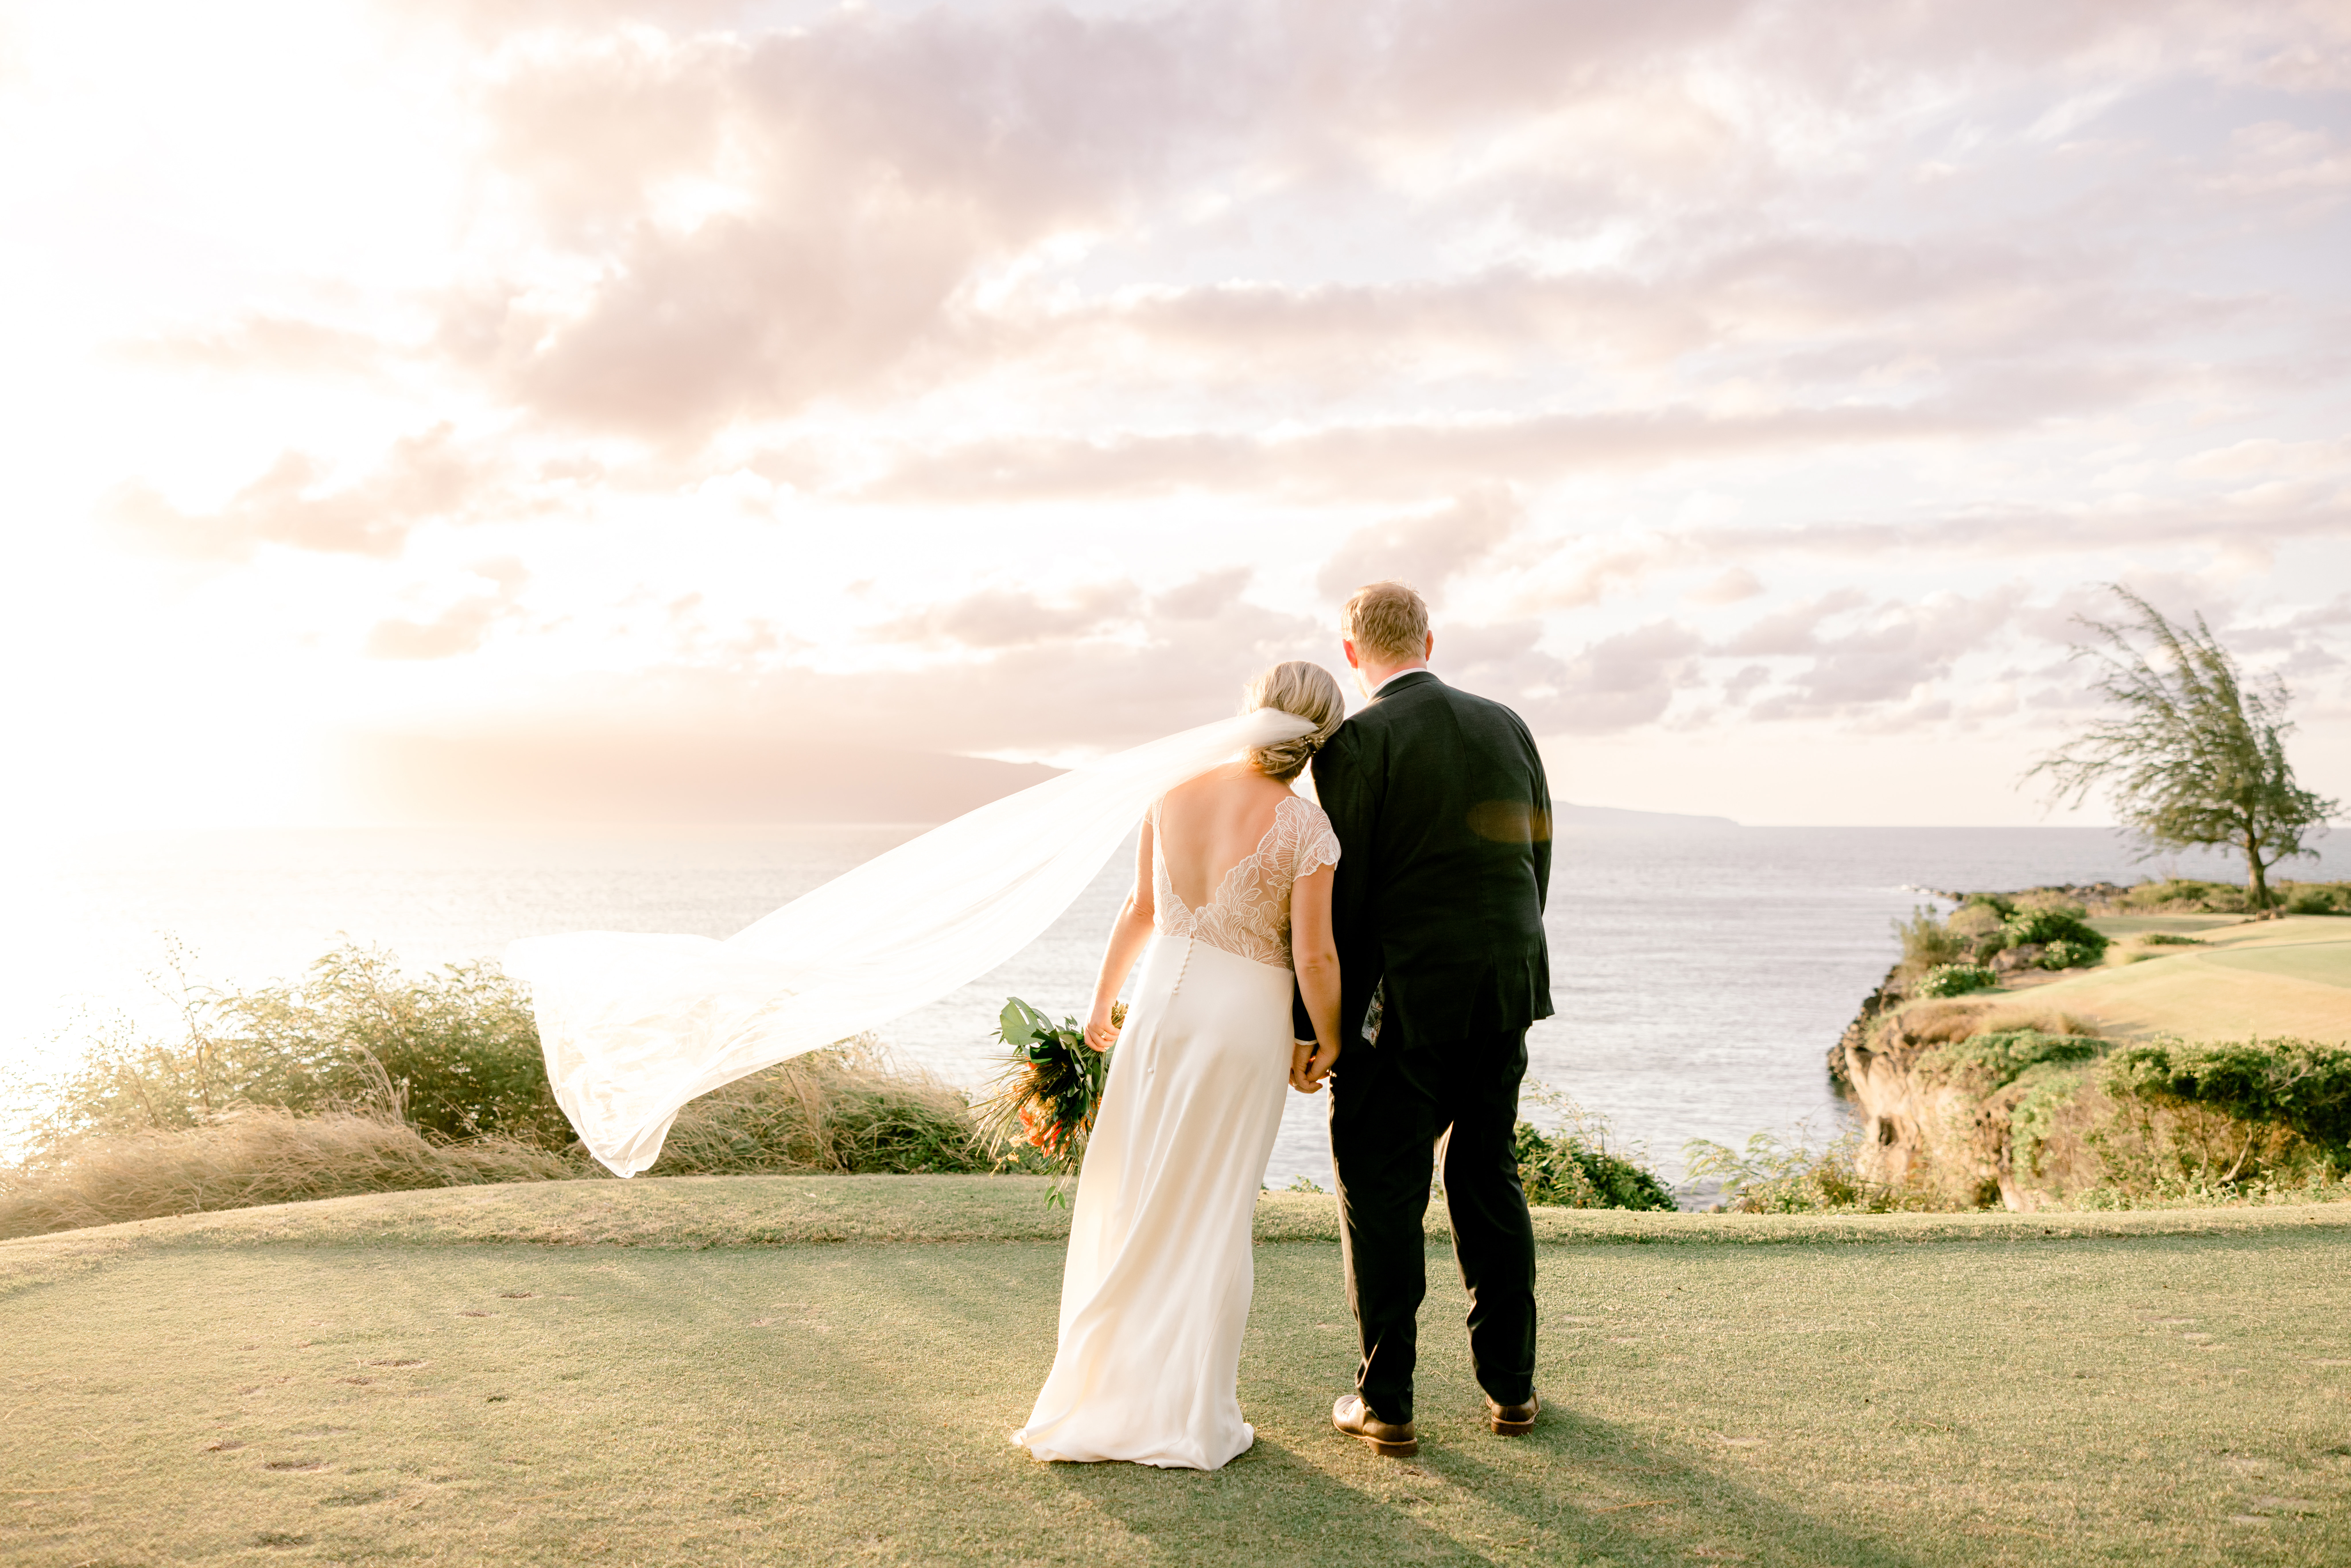 Bride and groom facing the ocean, standing in grass area holding hands while veil floating in the wind